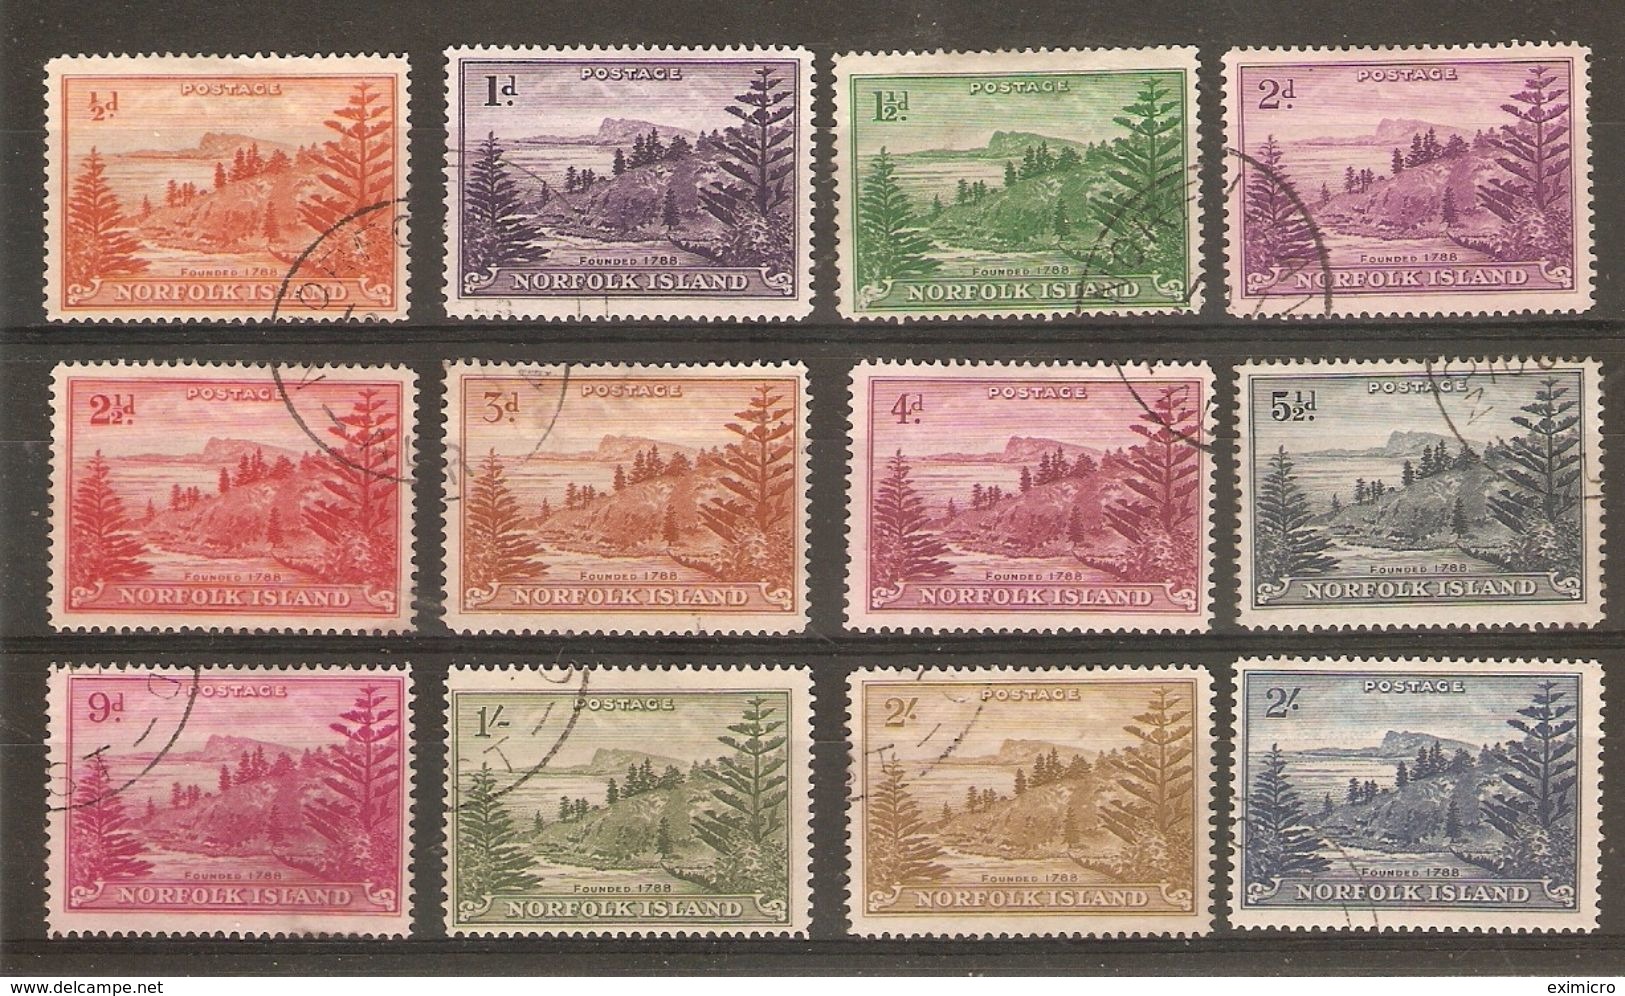 NORFOLK ISLAND 1947 - 1949 SET SG 1/12a (ex SG 6a,9) FINE USED - UNCHECKED FOR WHITE PAPER ISSUES!!! - Norfolk Island